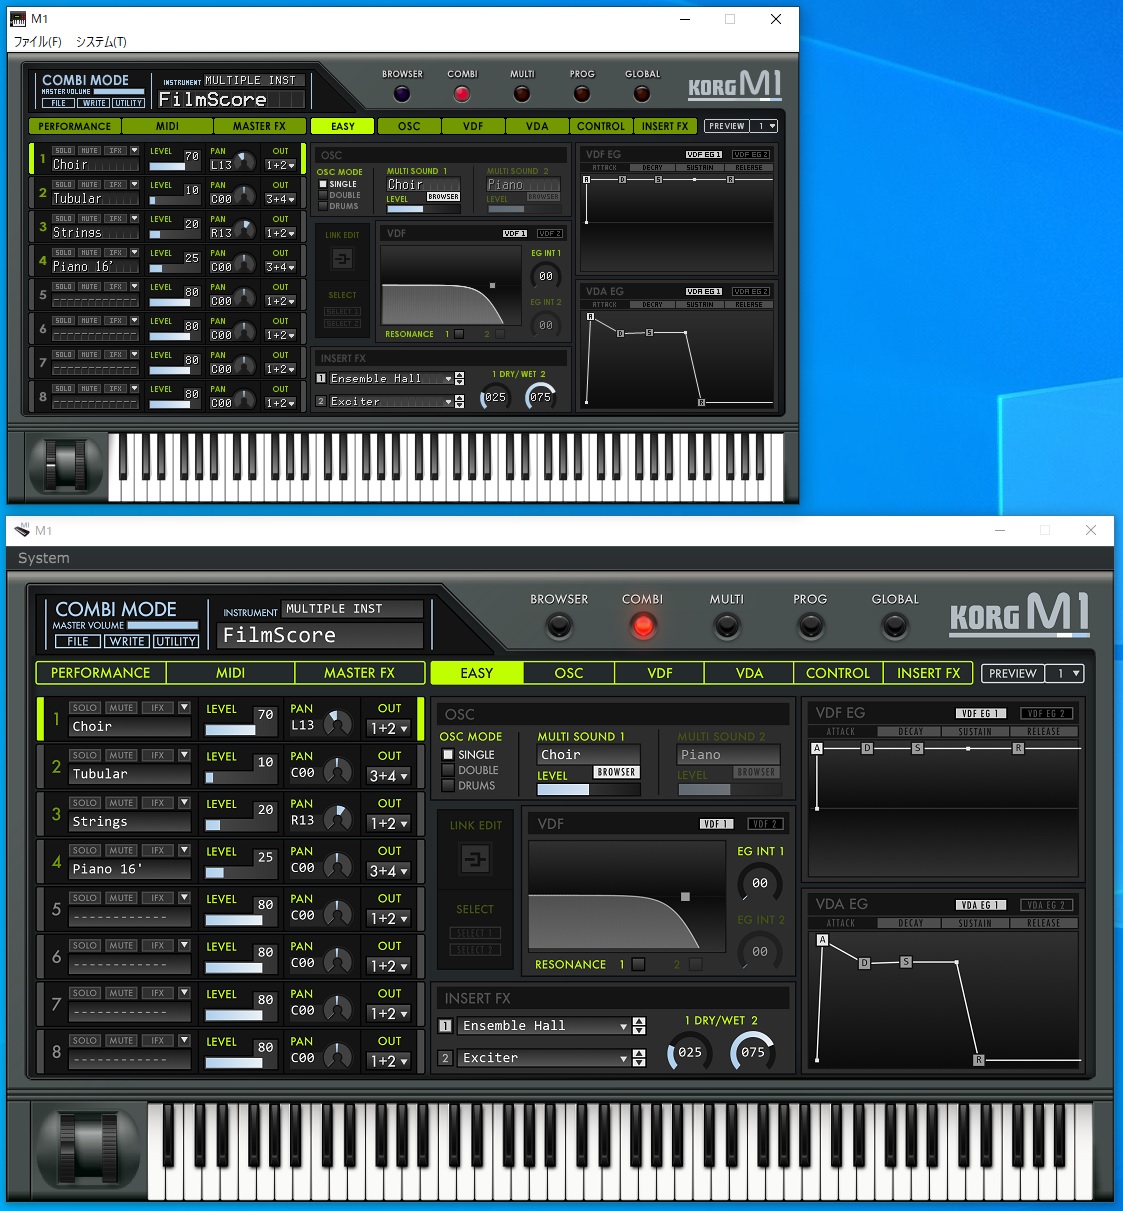 do i have to register korg legacy collection m1 vst before i use it